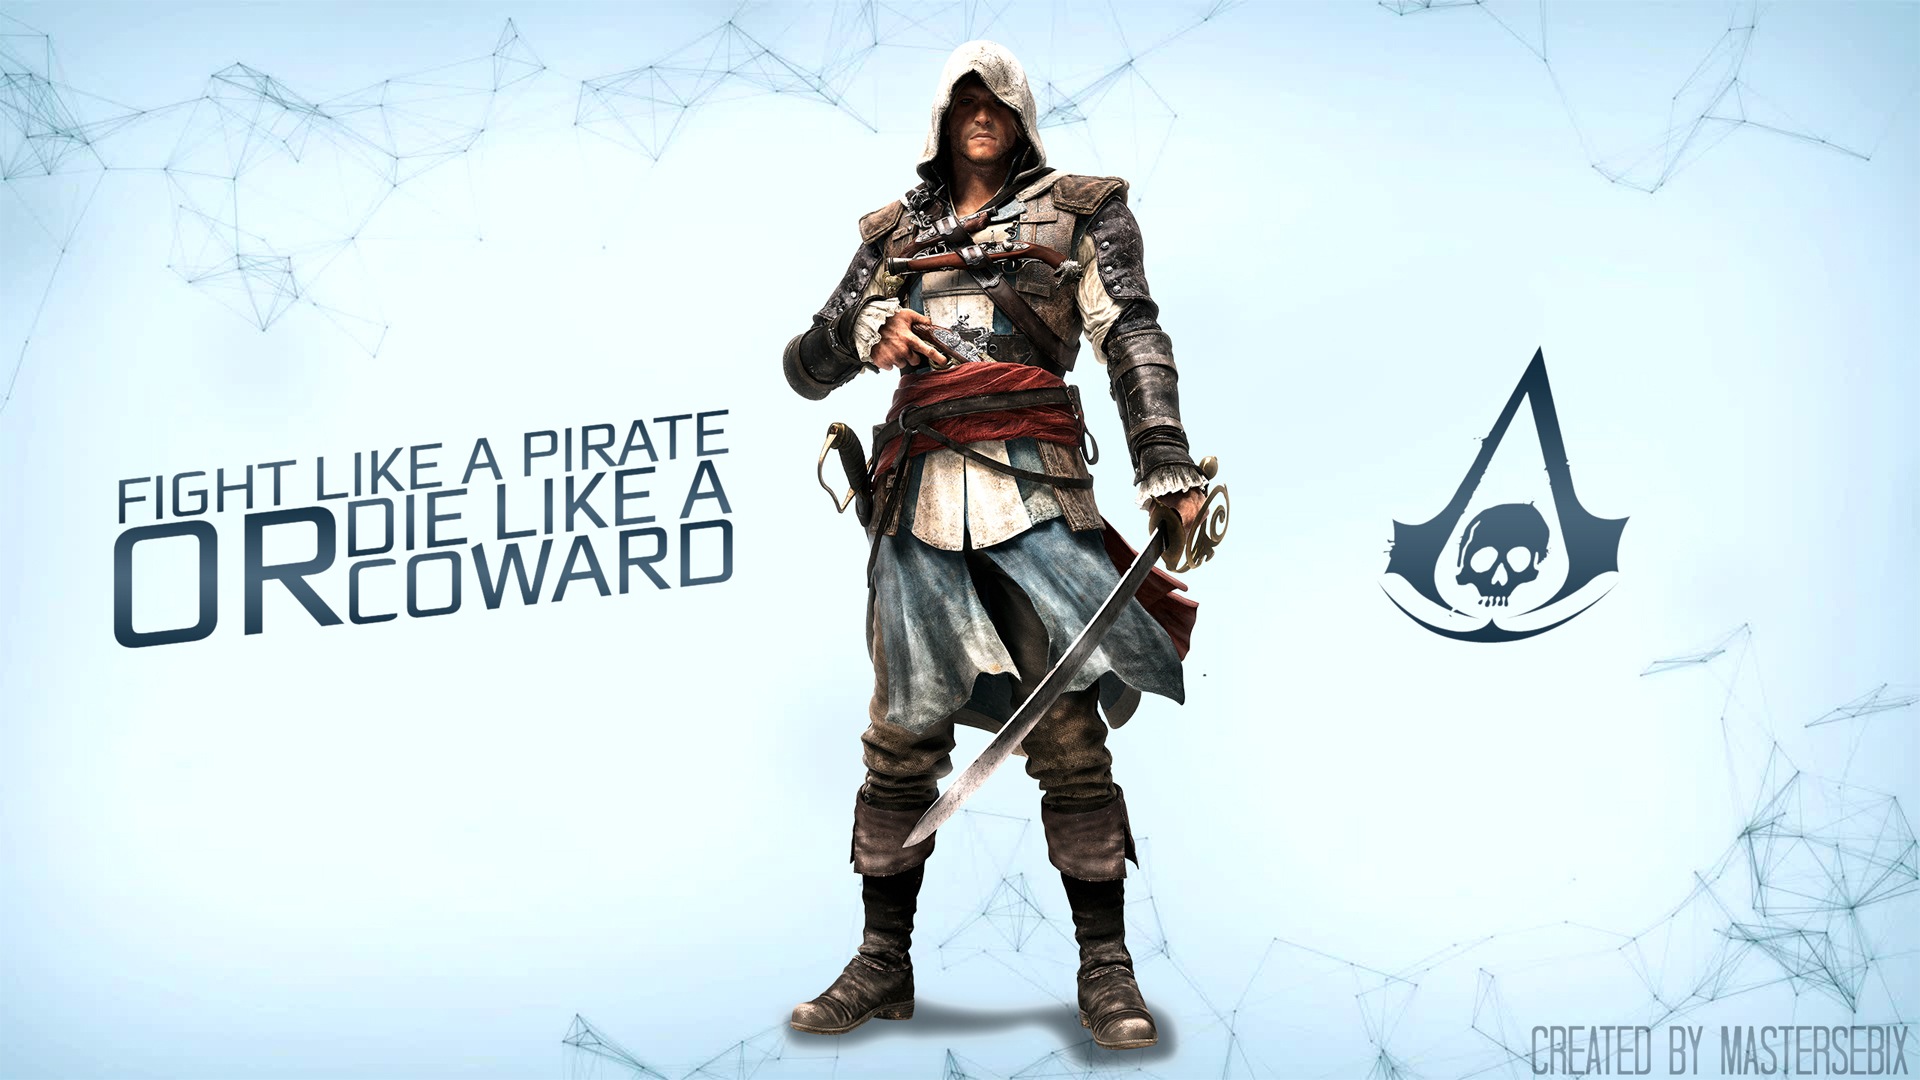 Creed IV Assassin: Black Flag HD wallpapers #3 - 1920x1080